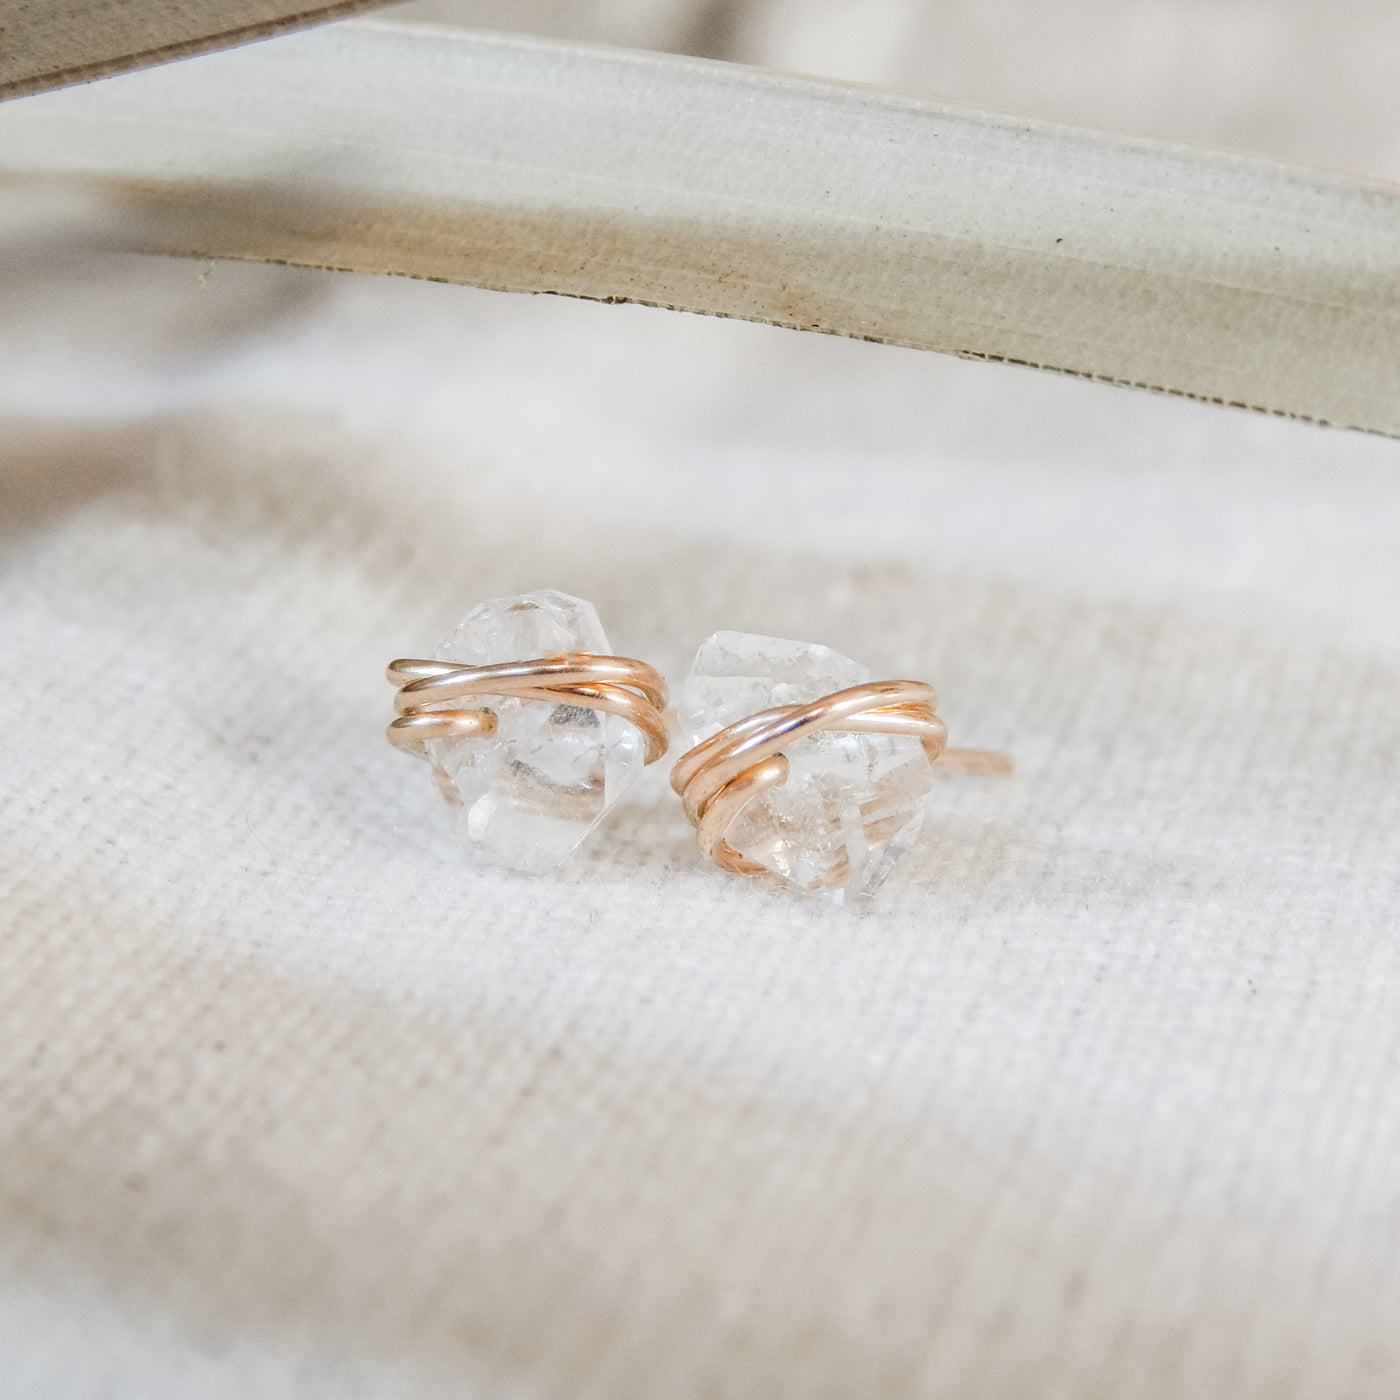 Hand-wired, hypoallergenic Herkimer Diamond Stud Earrings in .925 Sterling Silver, 14k Gold Fill or 14k Rose Gold Fill by Barberry & Lace